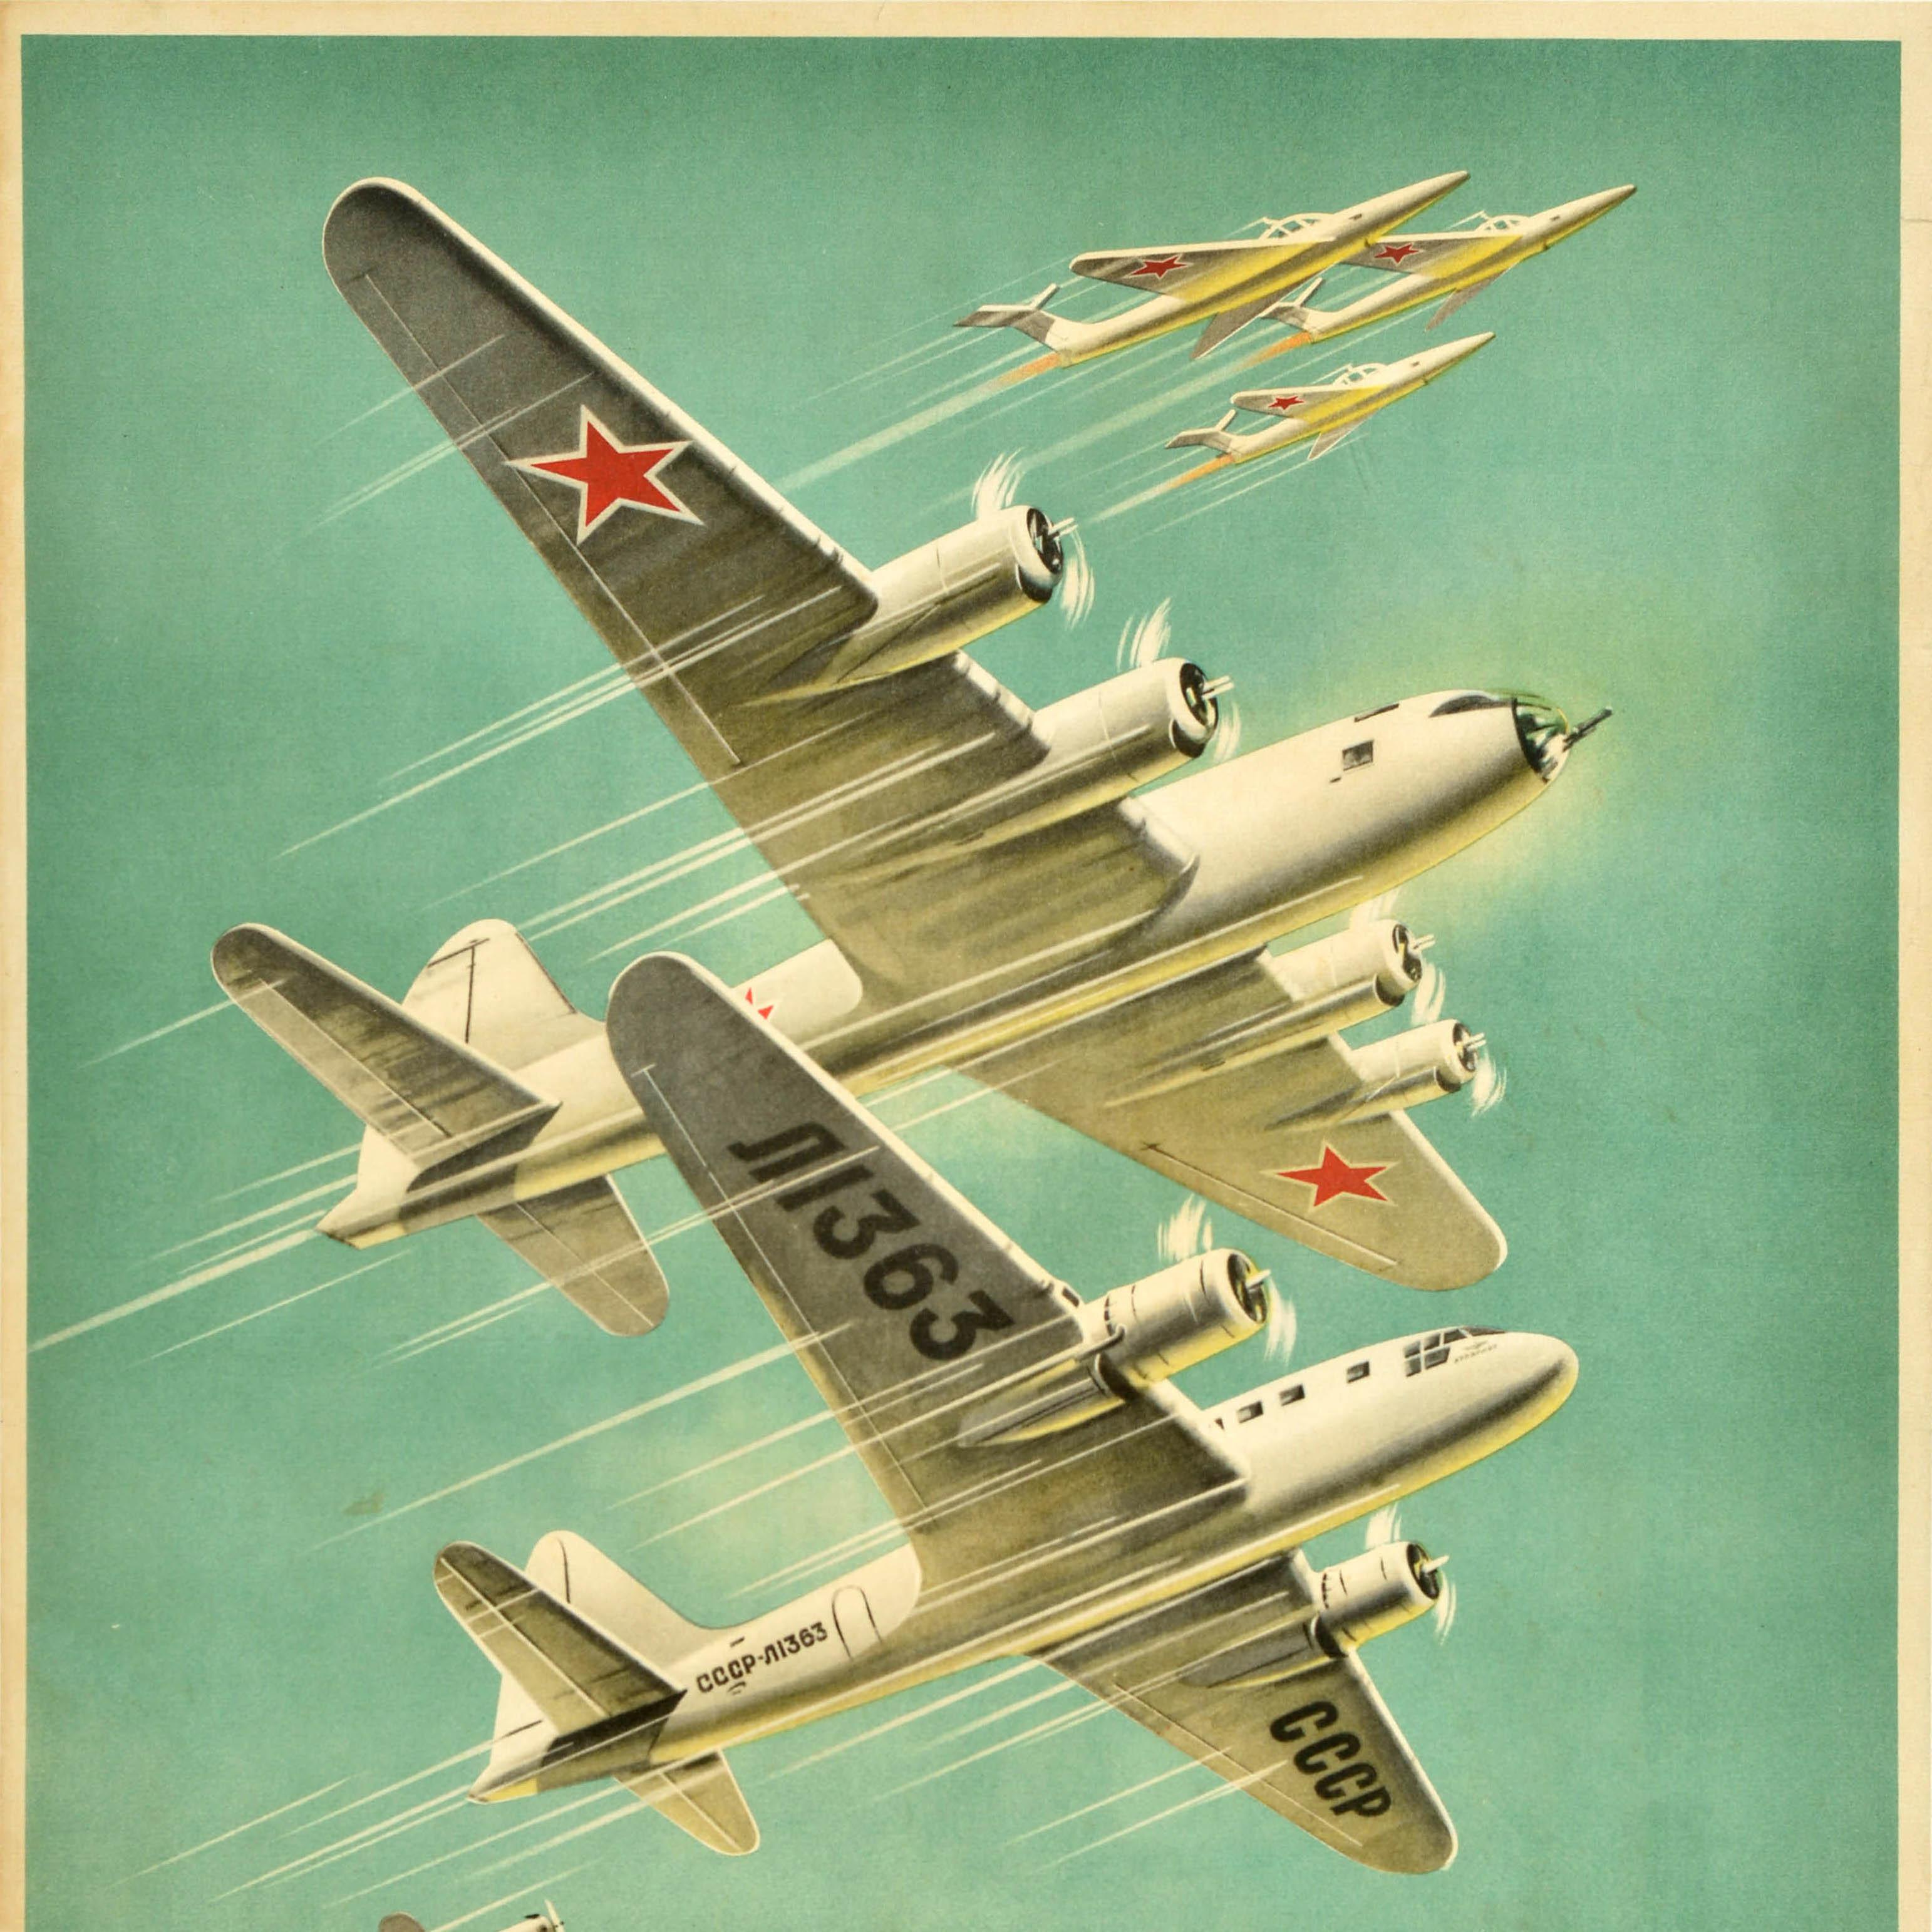 Russian Original Vintage Aviation Propaganda Poster Glory To Mighty Soviet Airforce USSR For Sale